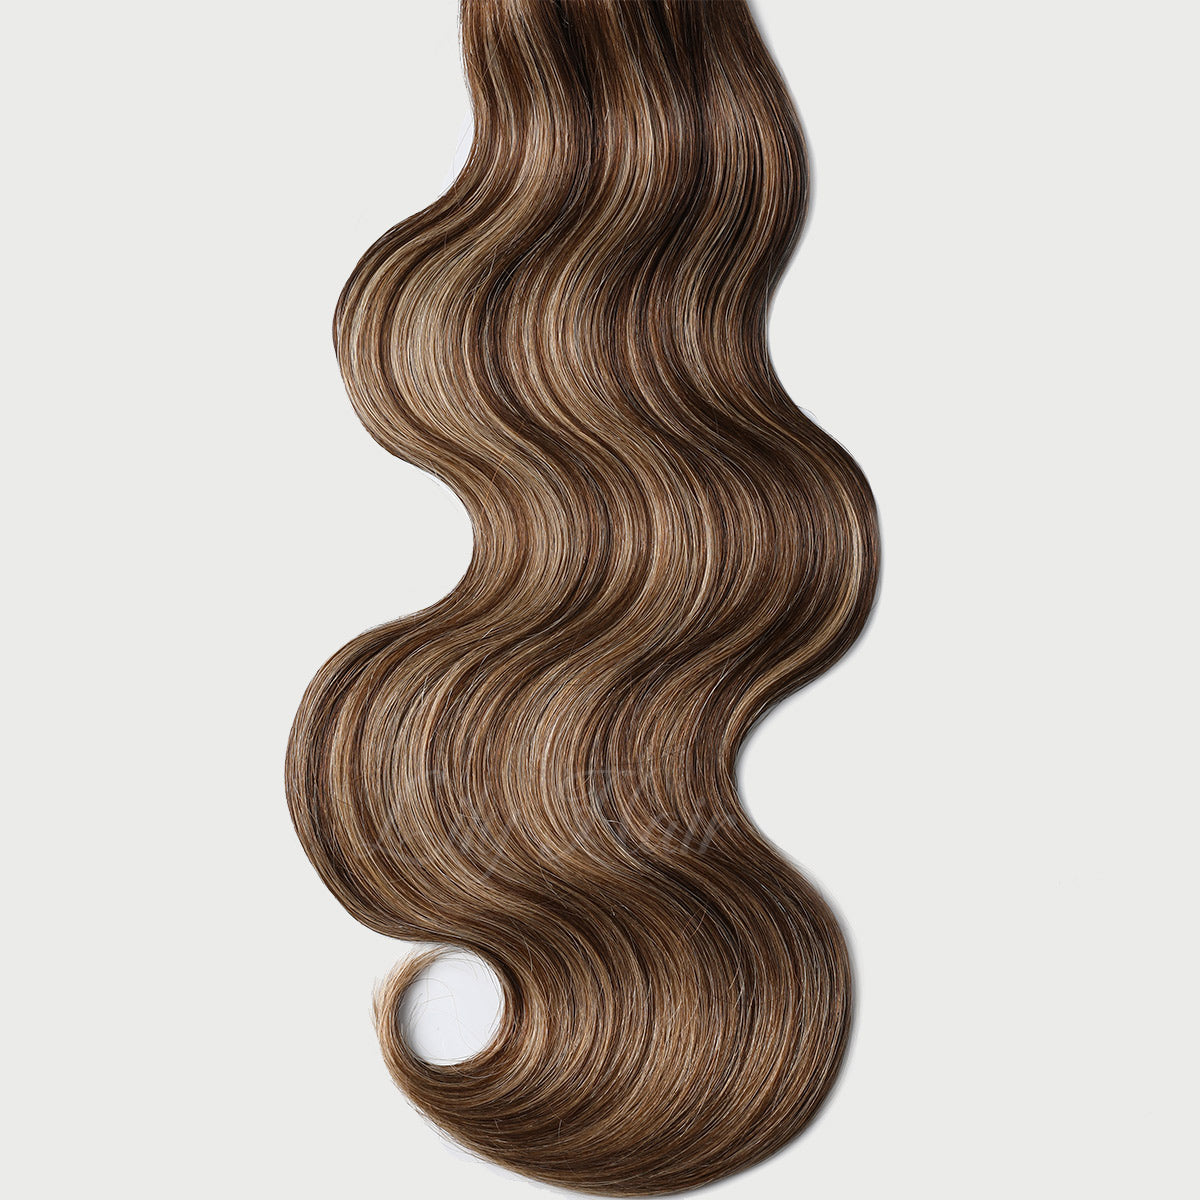 Remy Human Hair Extensions, 1g Pre-Bonded Tips